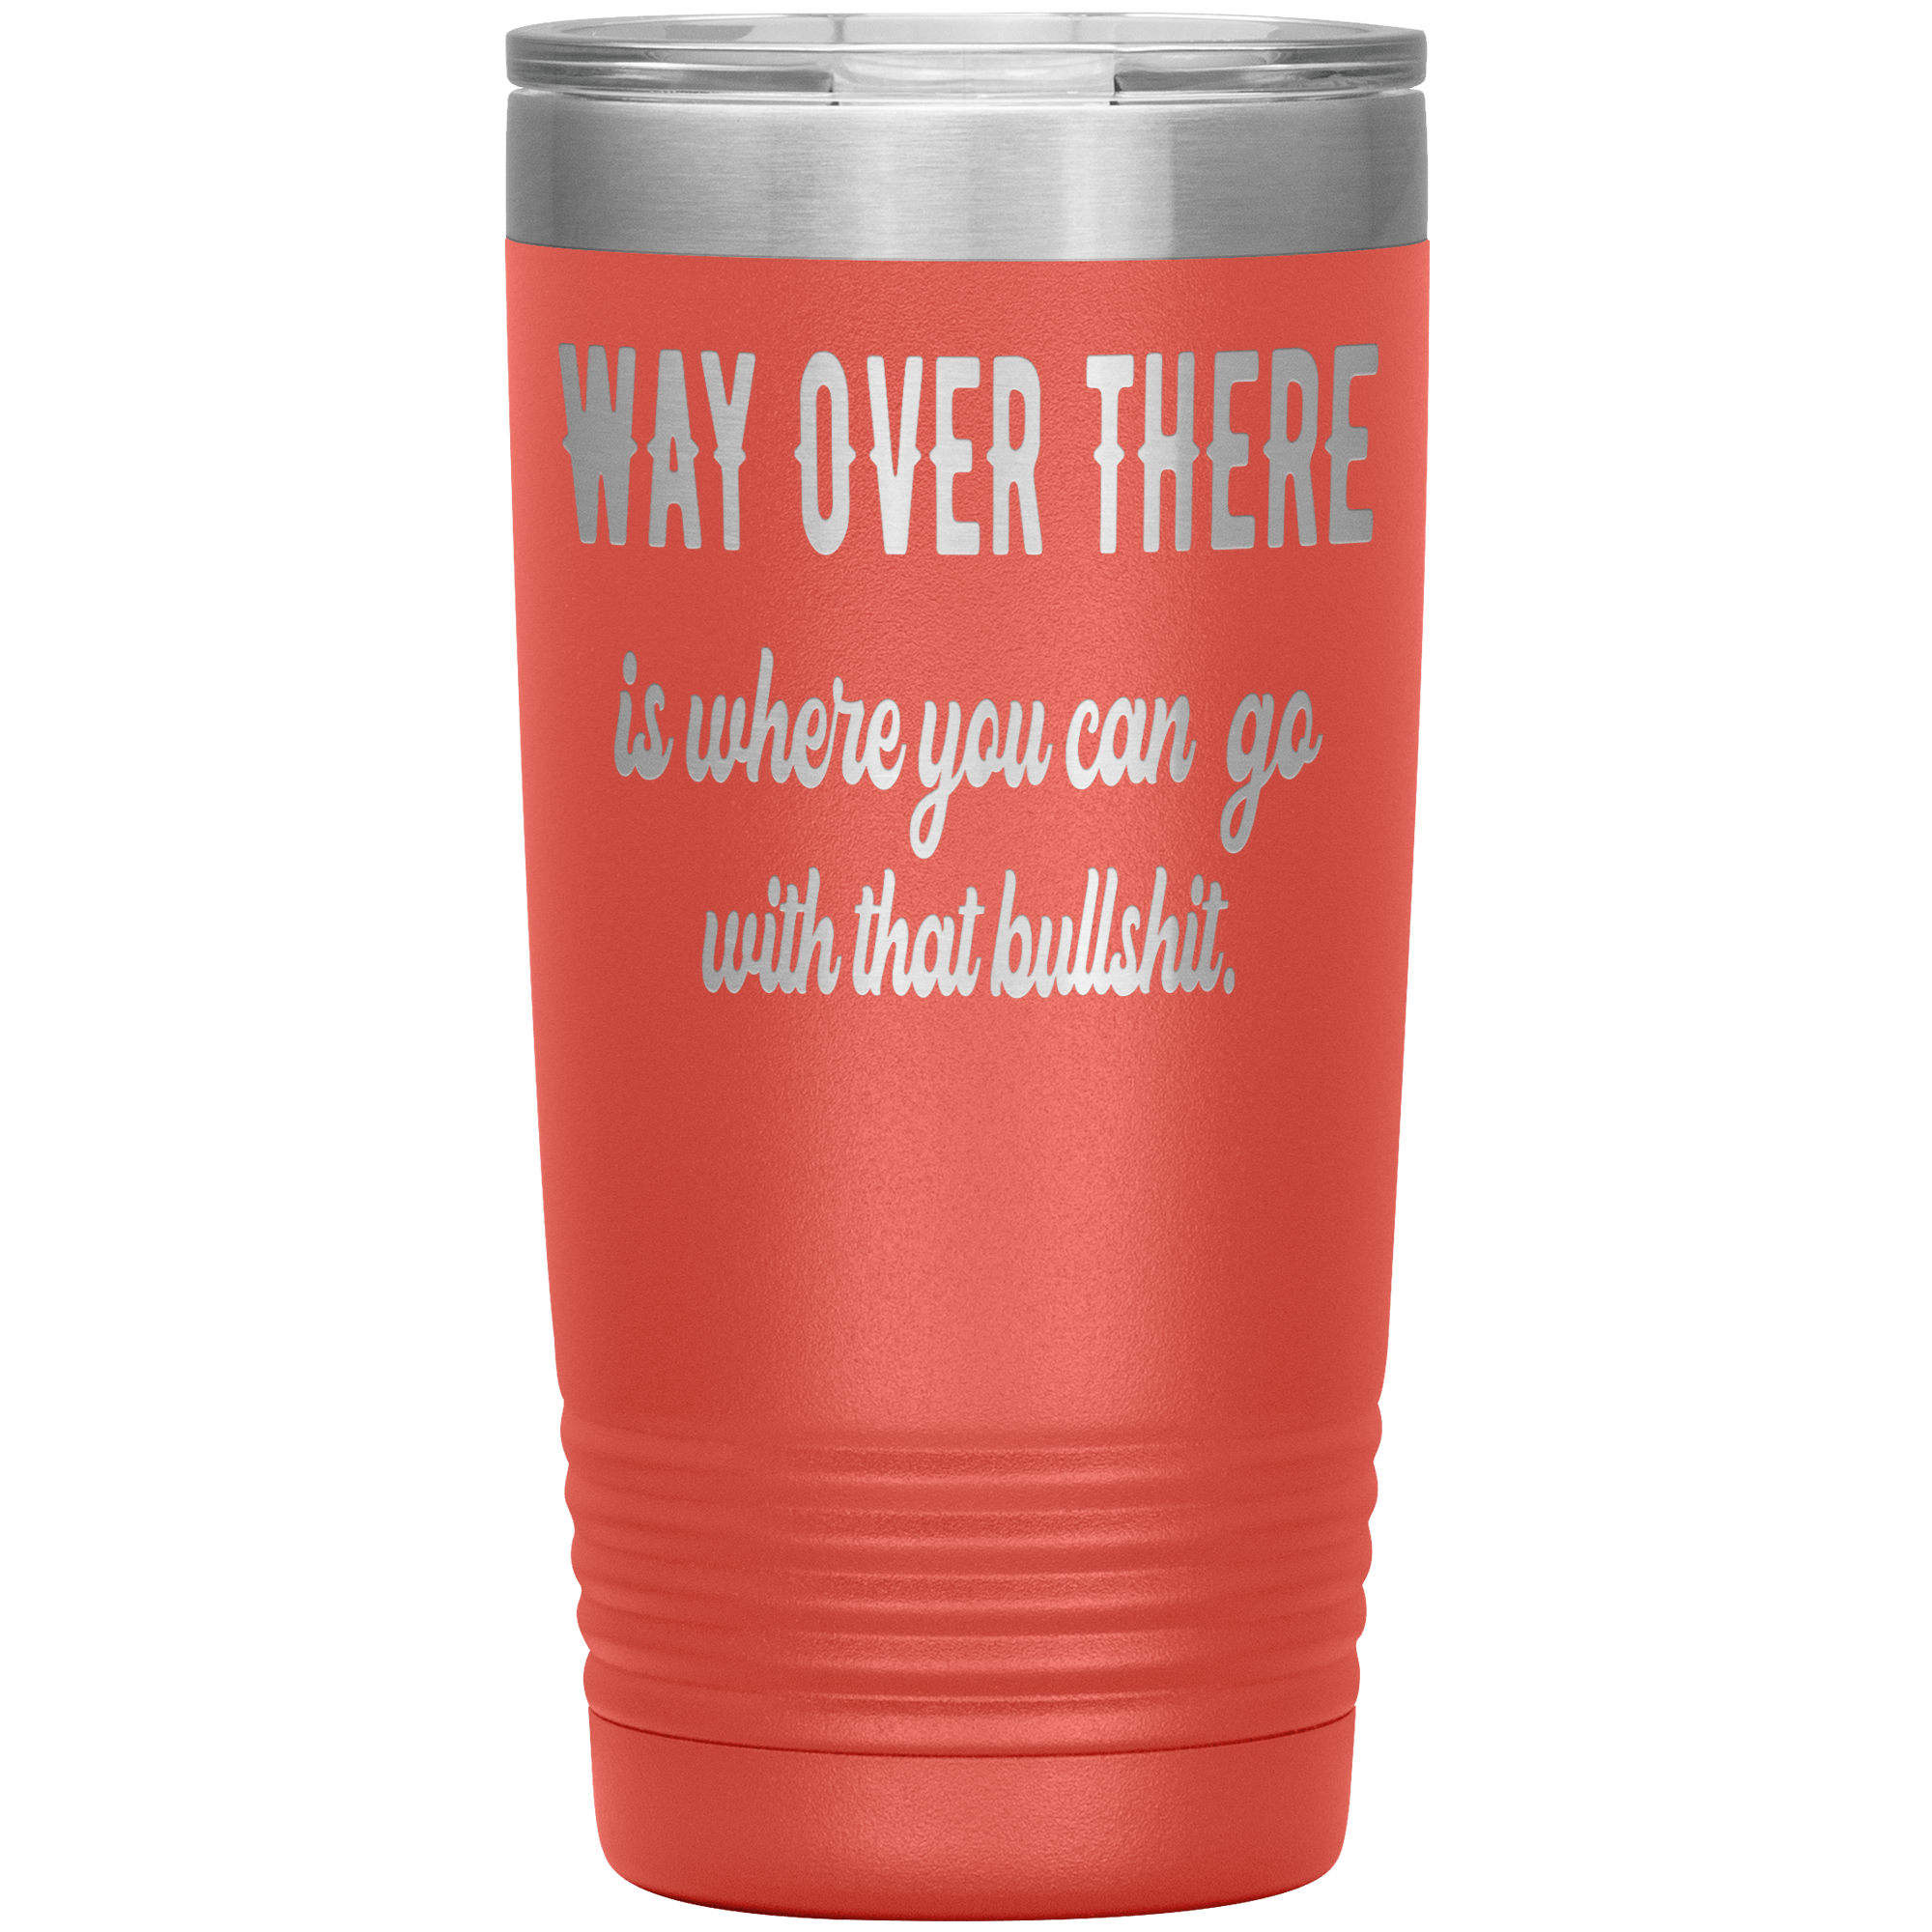 " WAY OVER THERE " TUMBLER